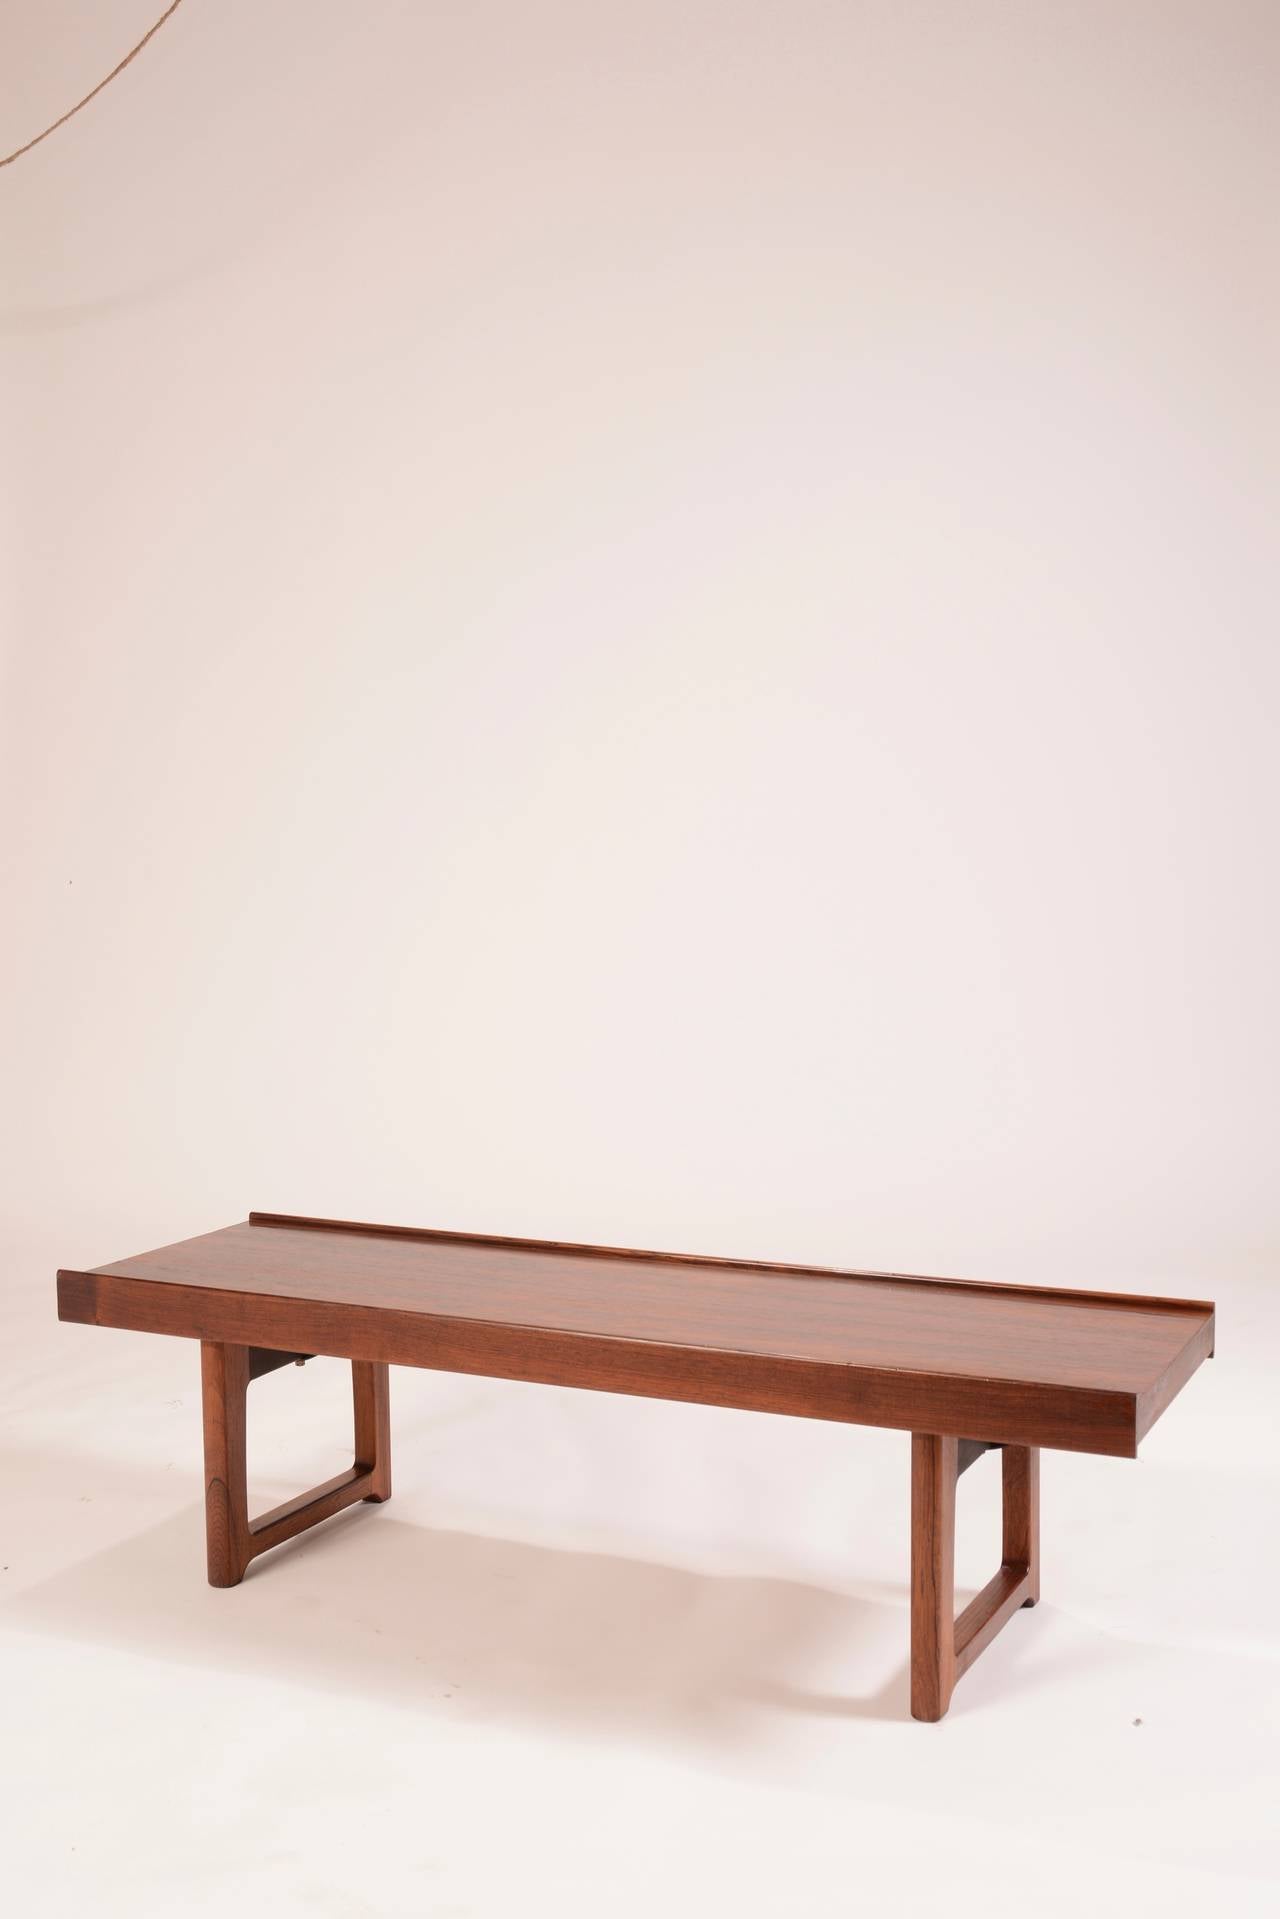 Rosewood bench designed by Torbjo¨rn Afdal for Bruksbo Møbler, Norway. This piece has been professionally restored to its original condition.